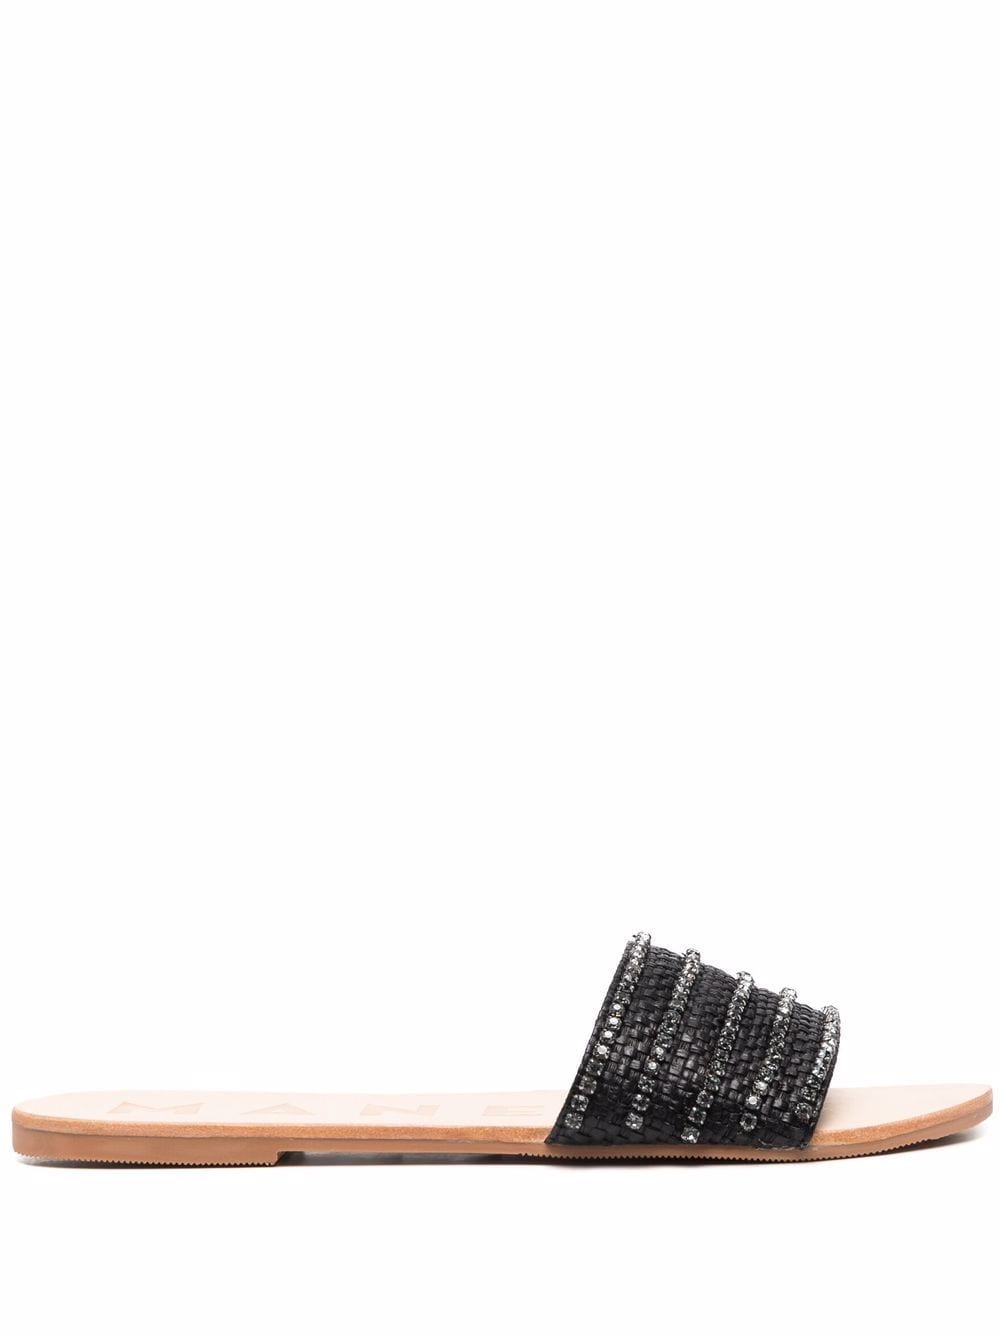 Shop Manebi leather slip-on sandals with Express Delivery - FARFETCH